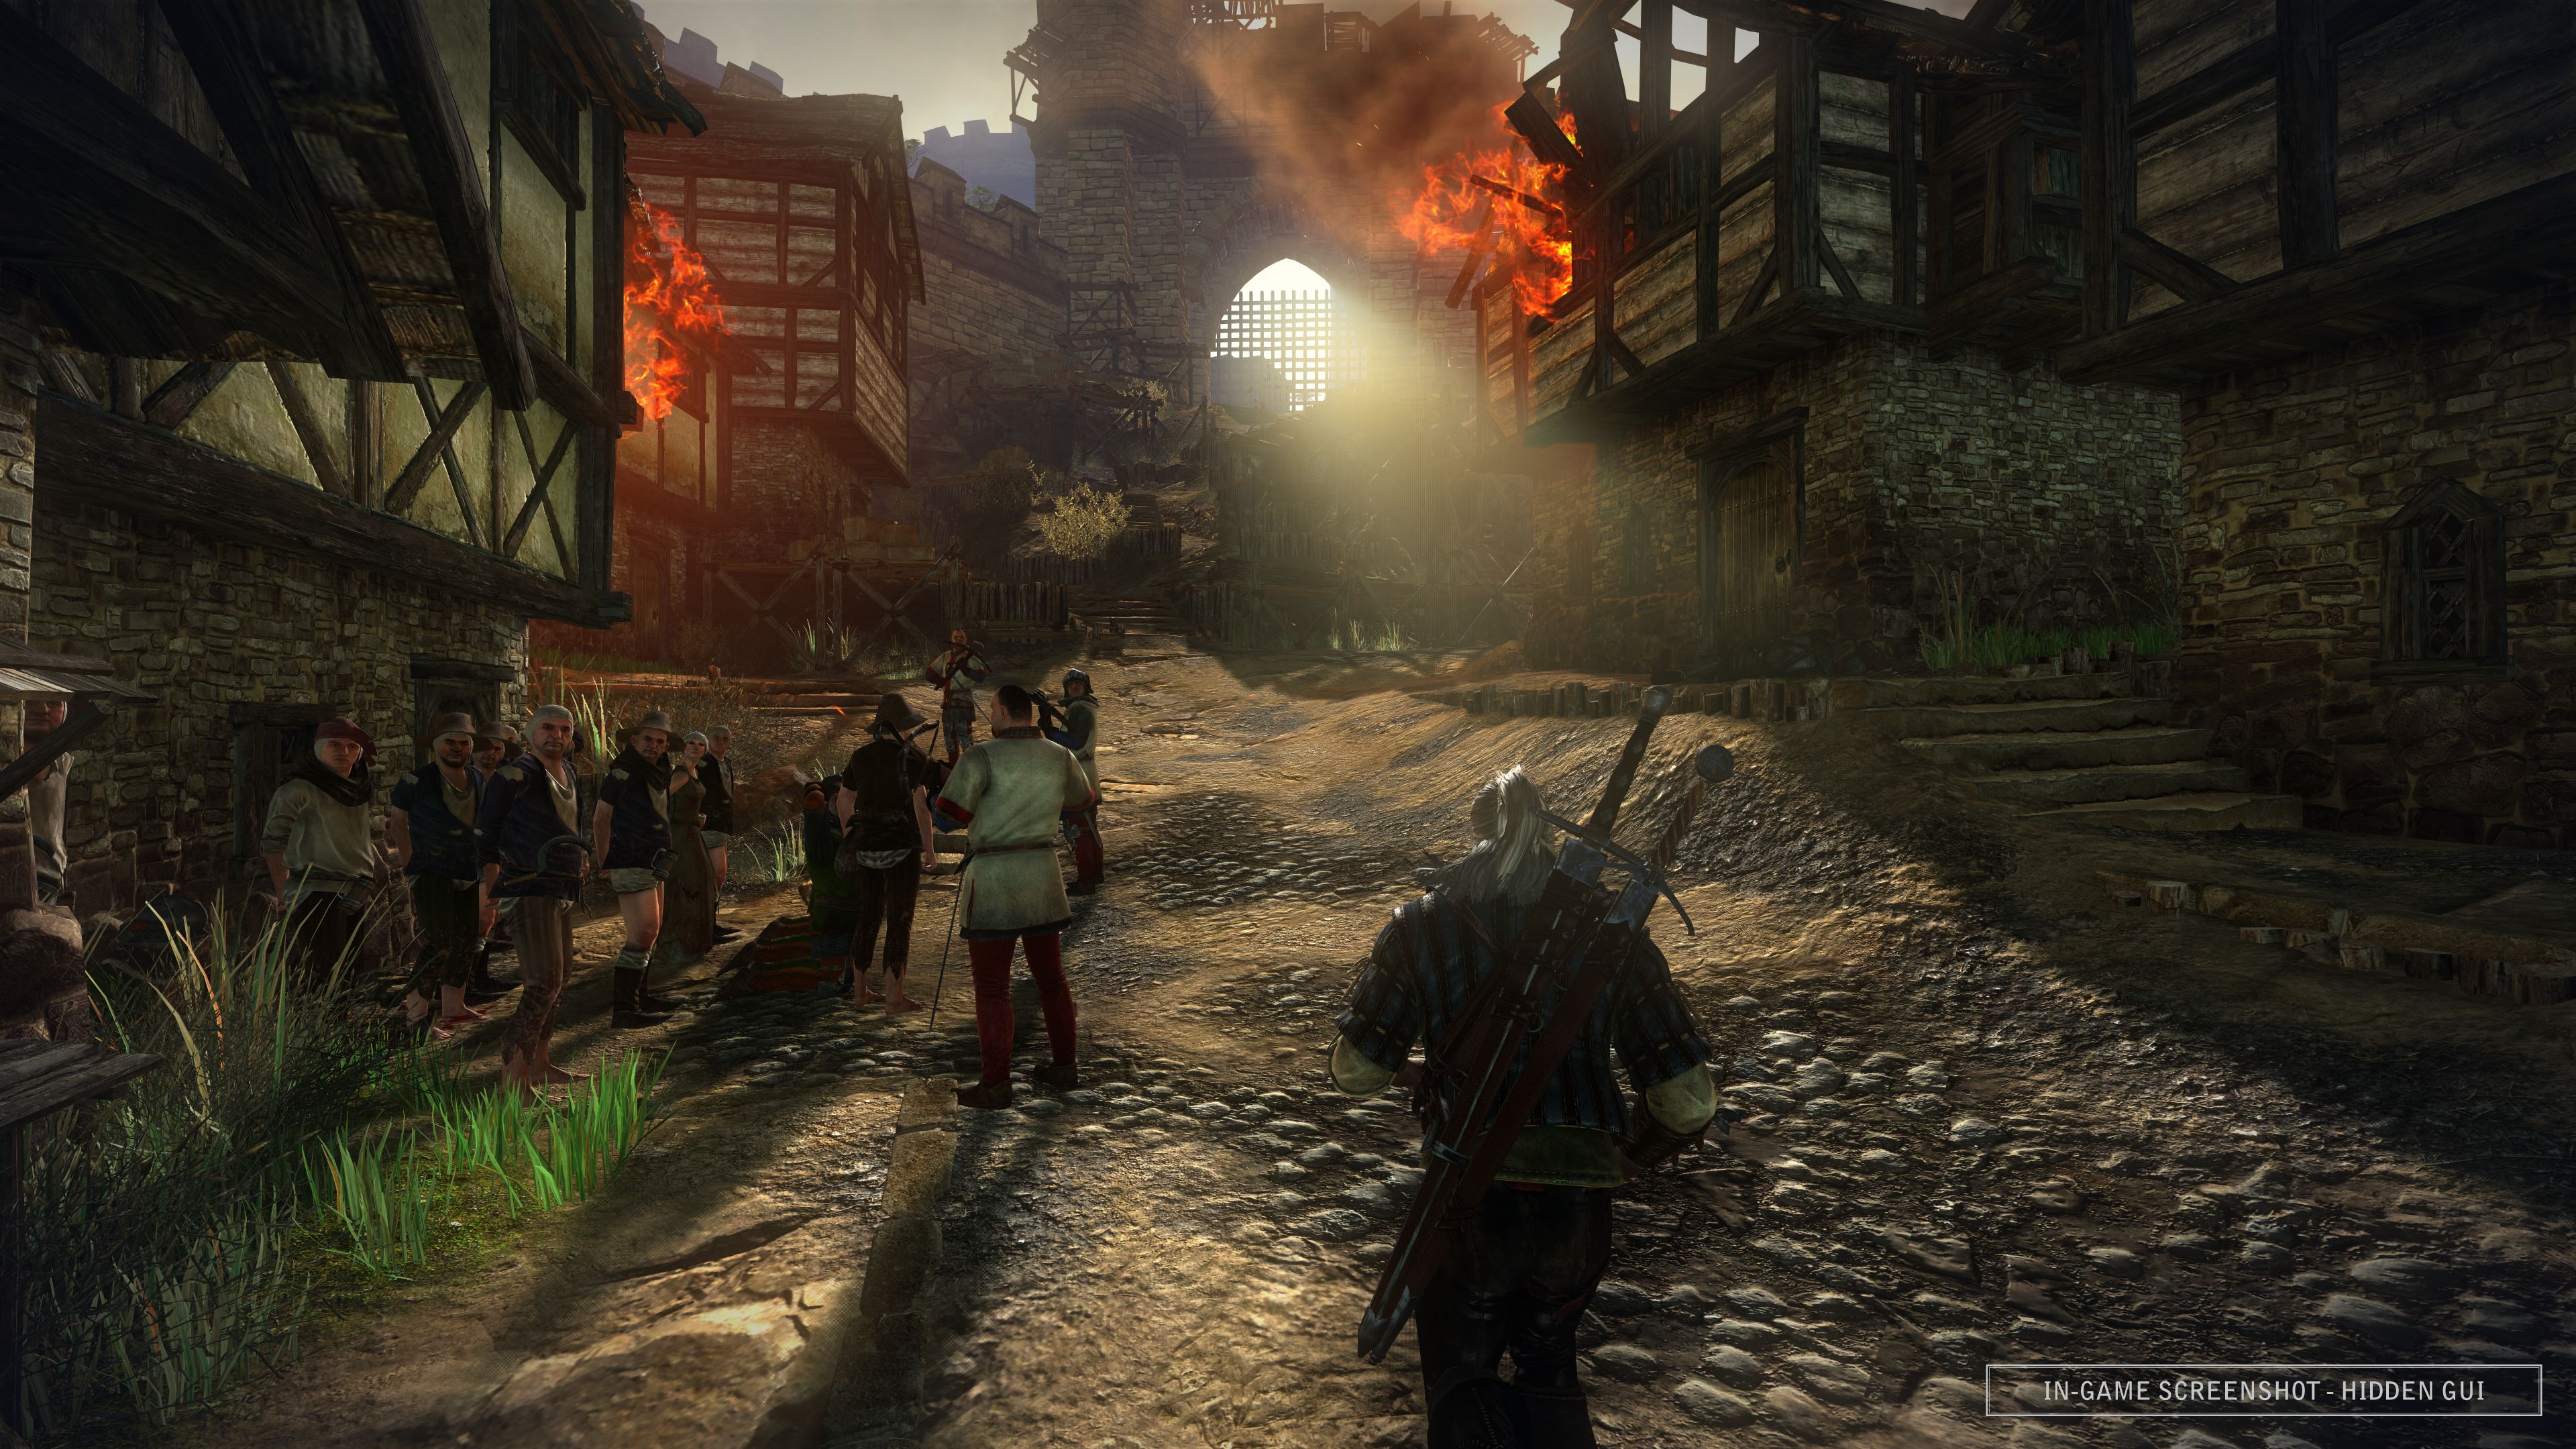 the witcher 2 gameplay pc